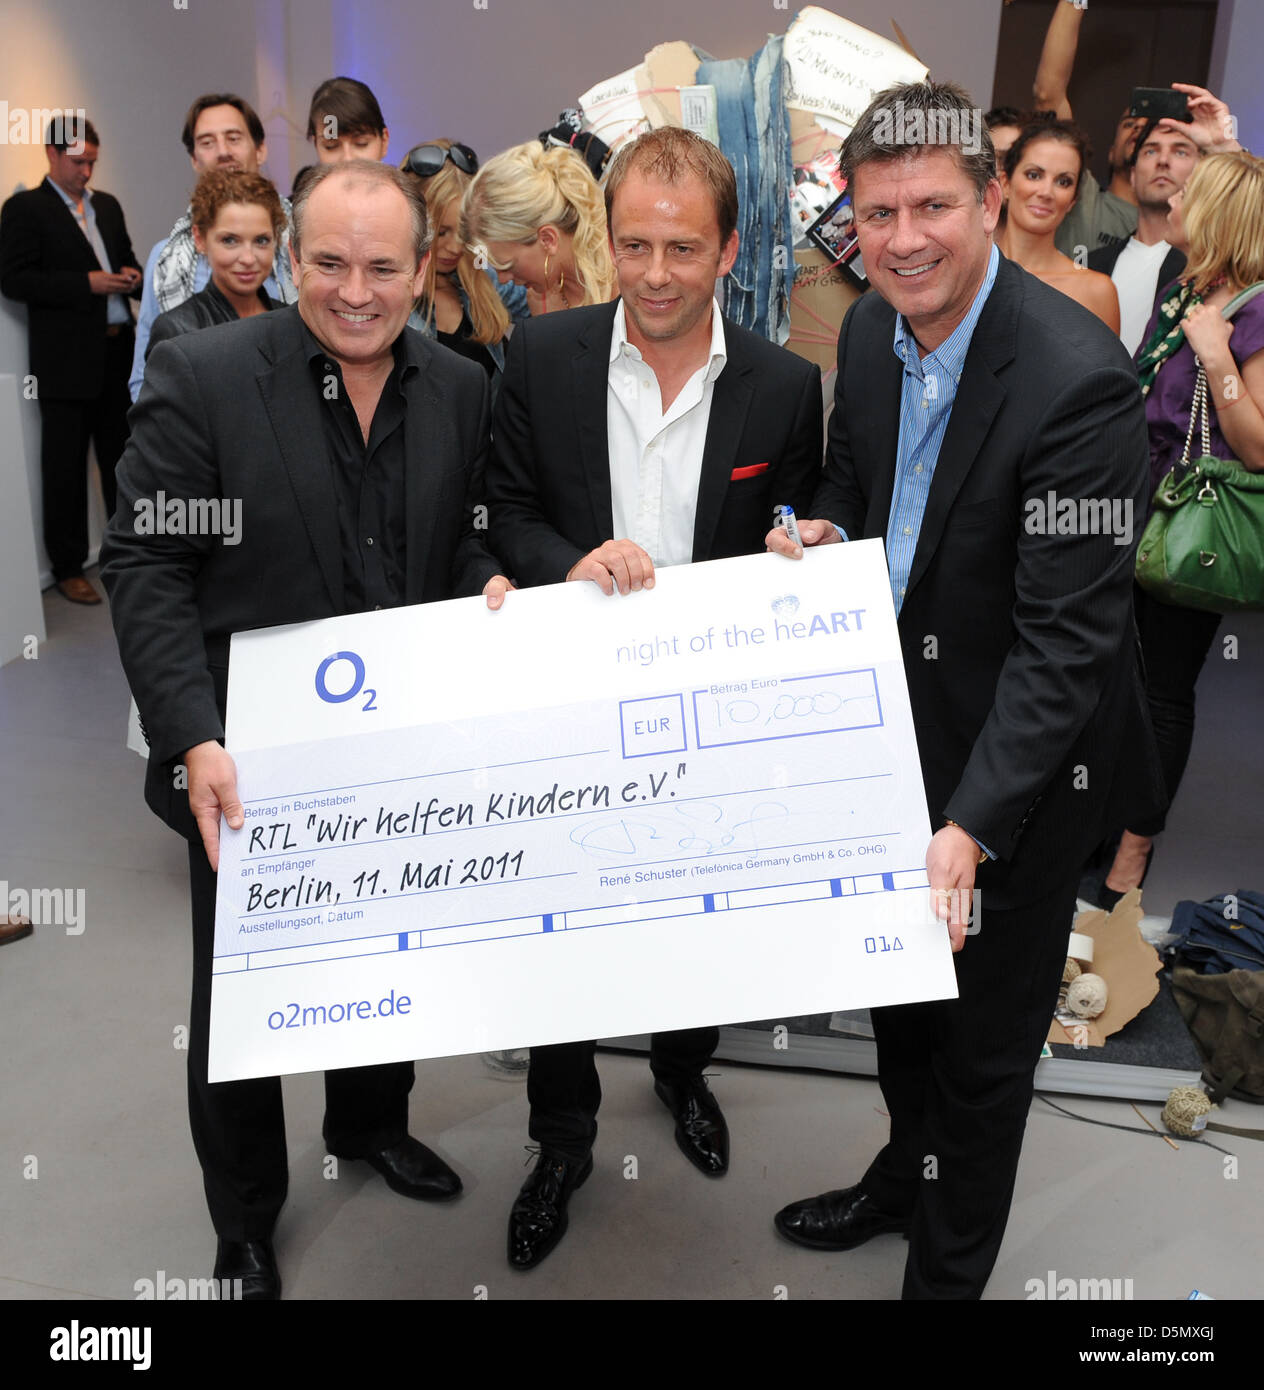 Wolfram Kons and guest and CEO O2 telefonica at 'Night of the heART' at Galerie Morgen Contemporary in Mitte. Berlin, Germany - Stock Photo